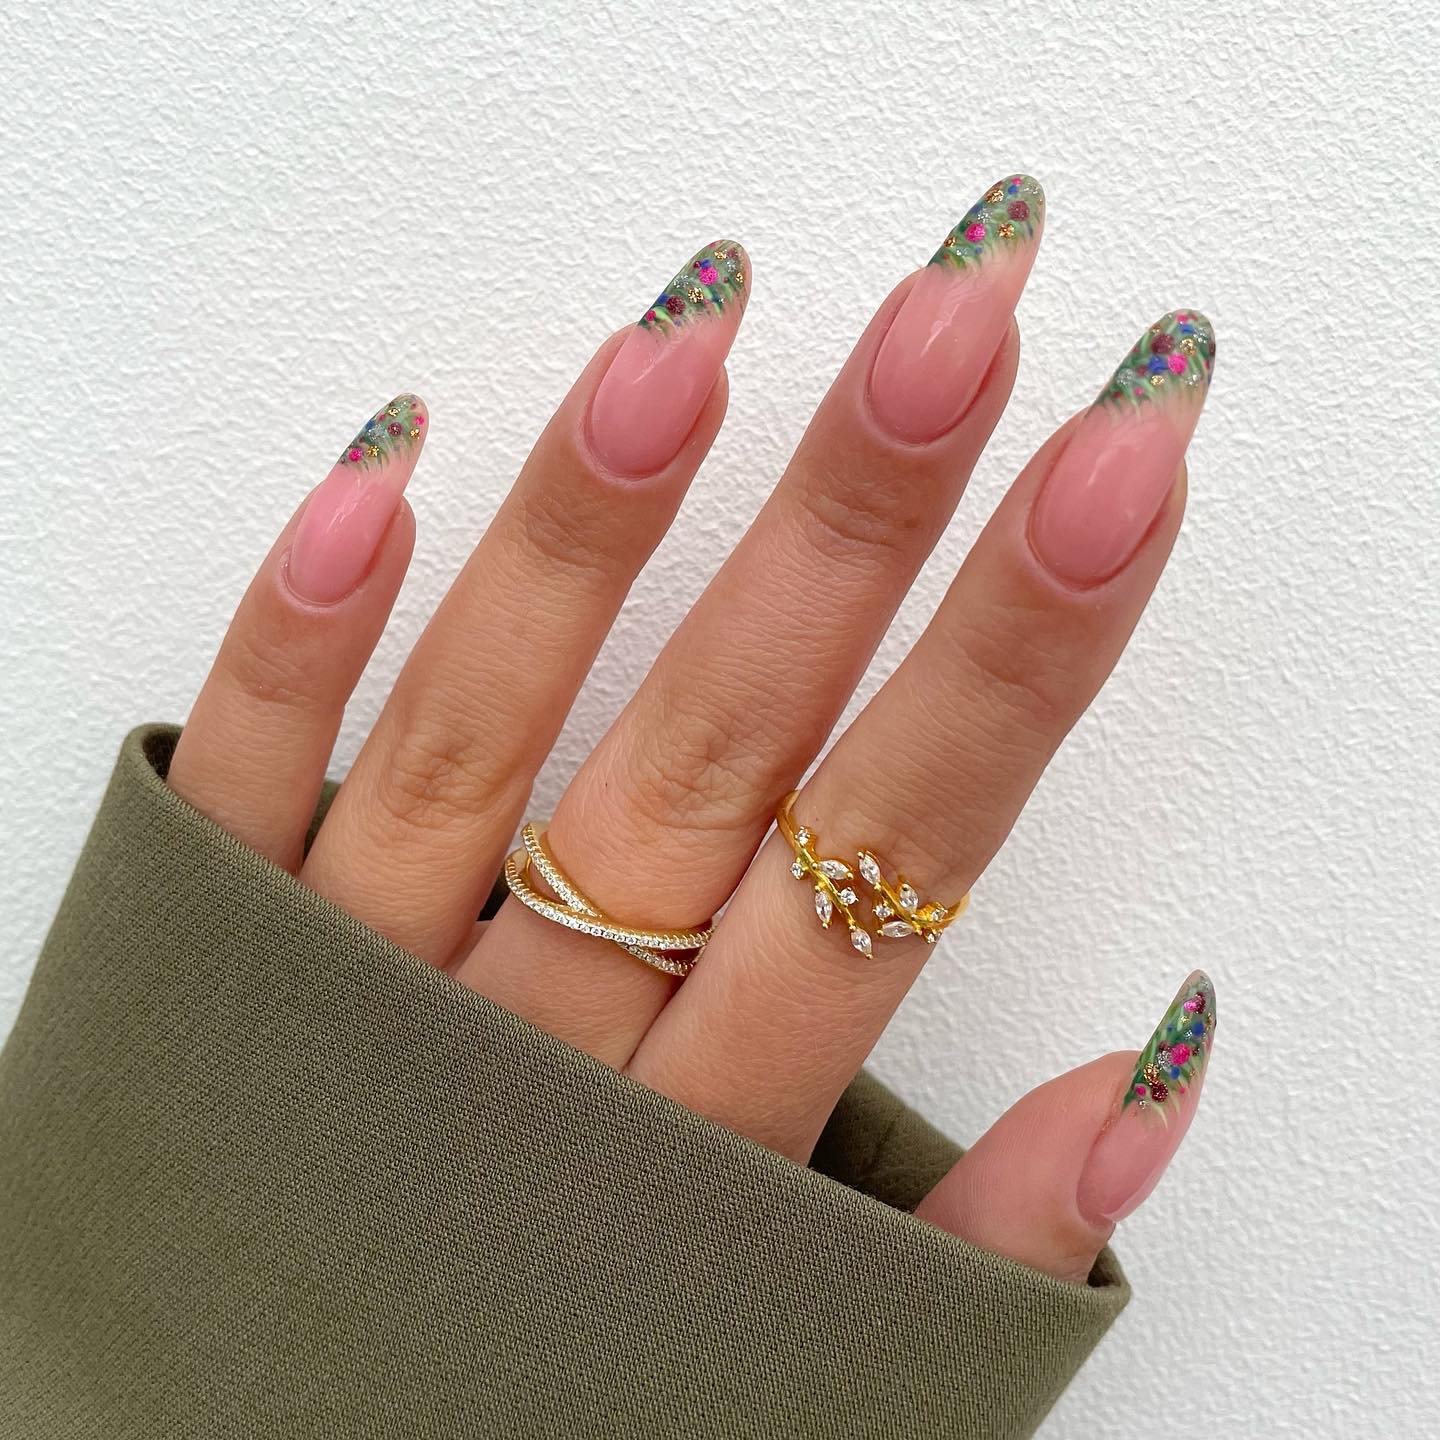 Long Nude Nails with Fir Tree Design